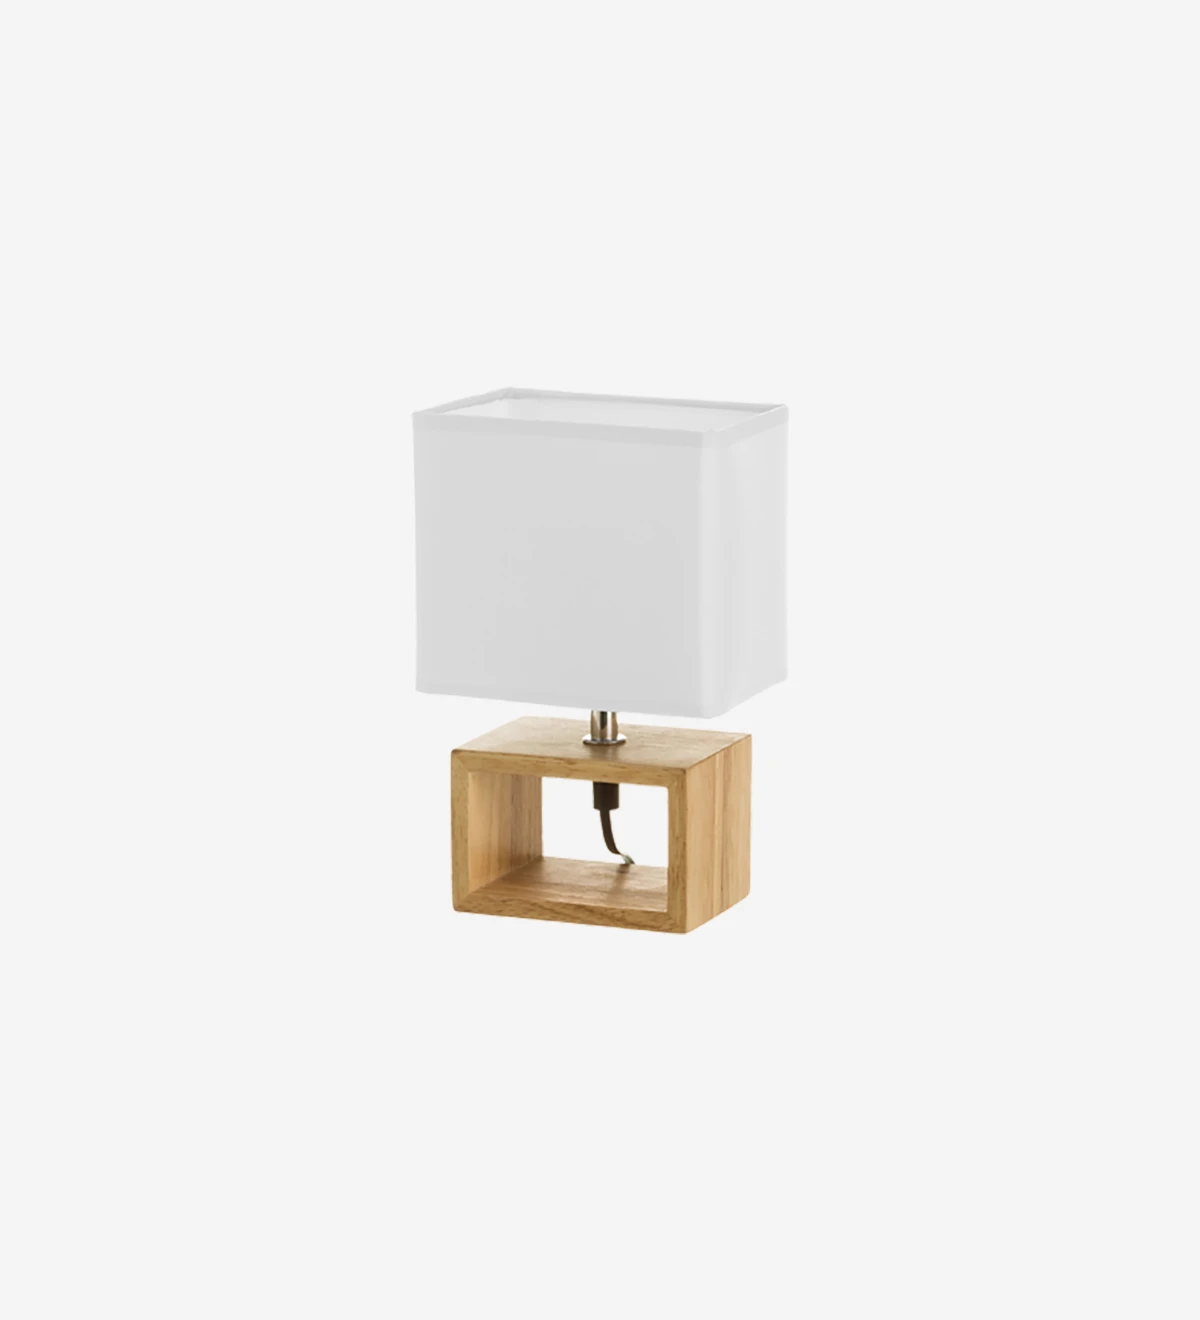  Table lamp with wooden base and shade in white lined fabric.